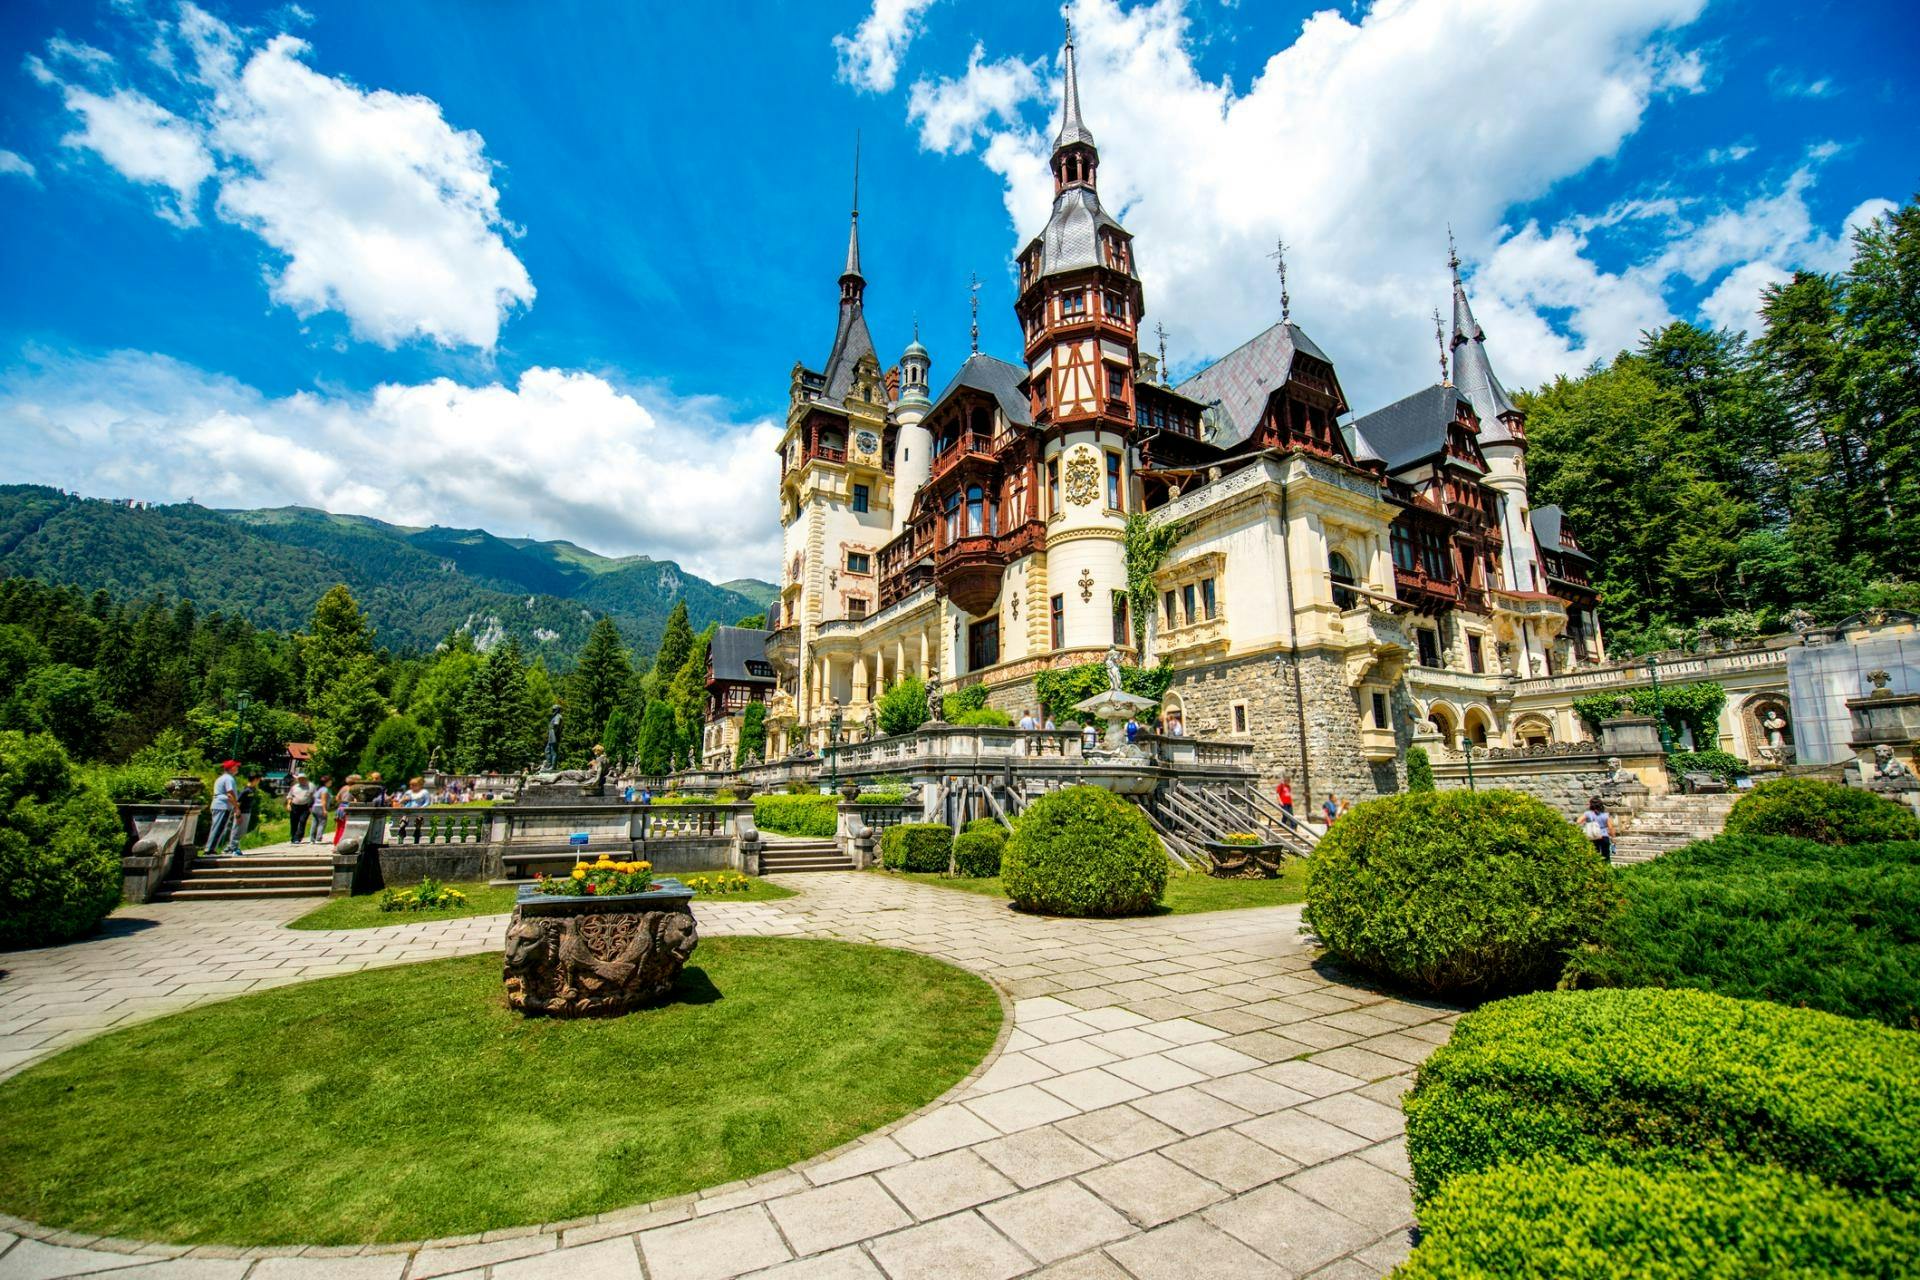 Peles Castle, the former home of the Romanian Royal Family